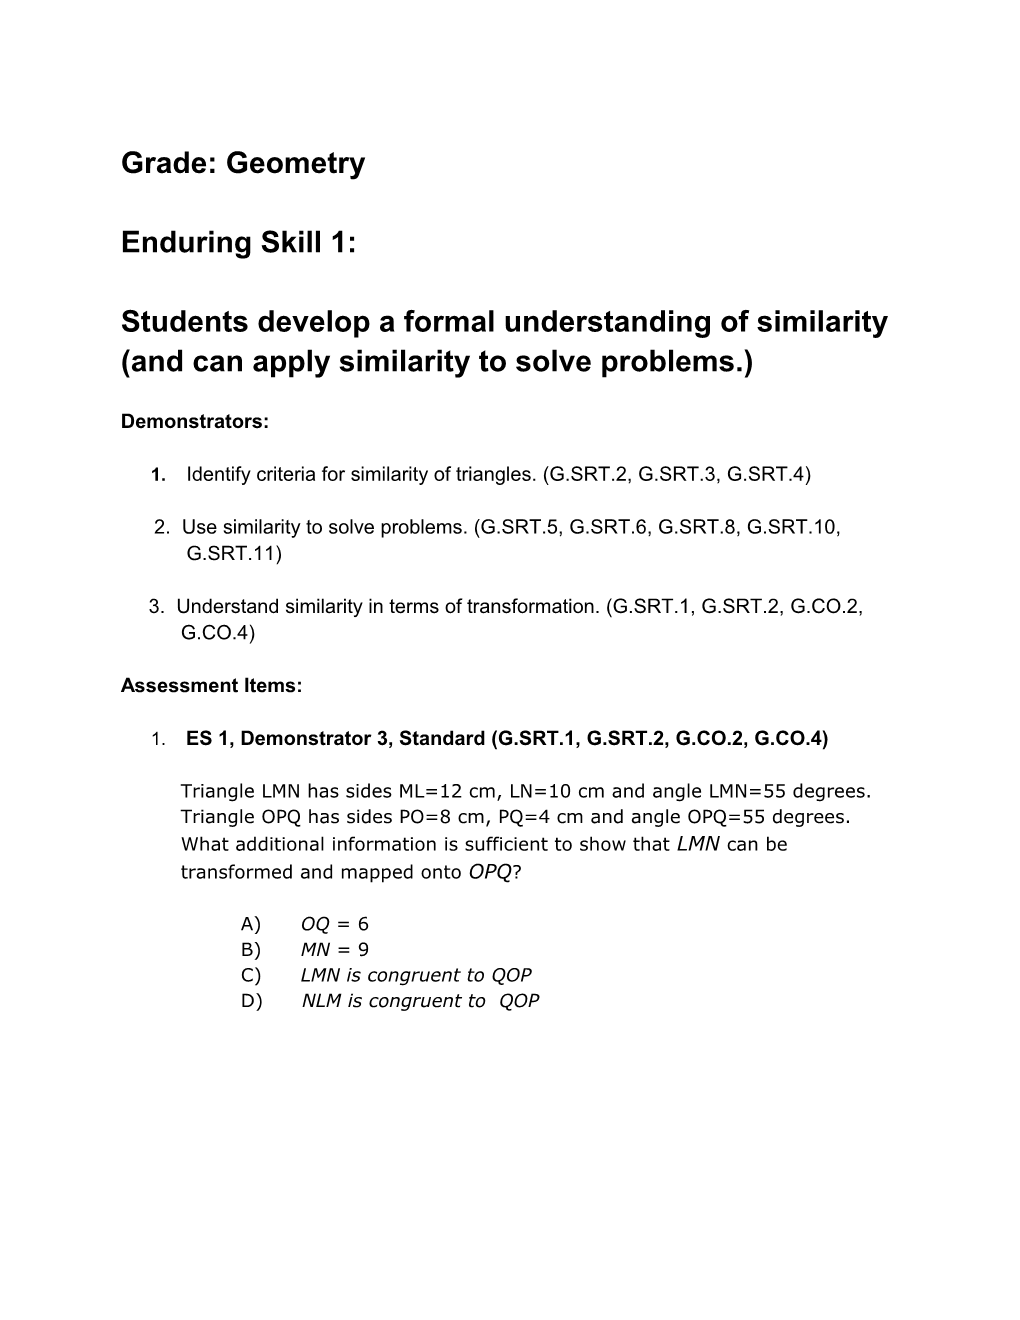 Students Develop a Formal Understanding of Similarity (And Can Apply Similarity to Solve